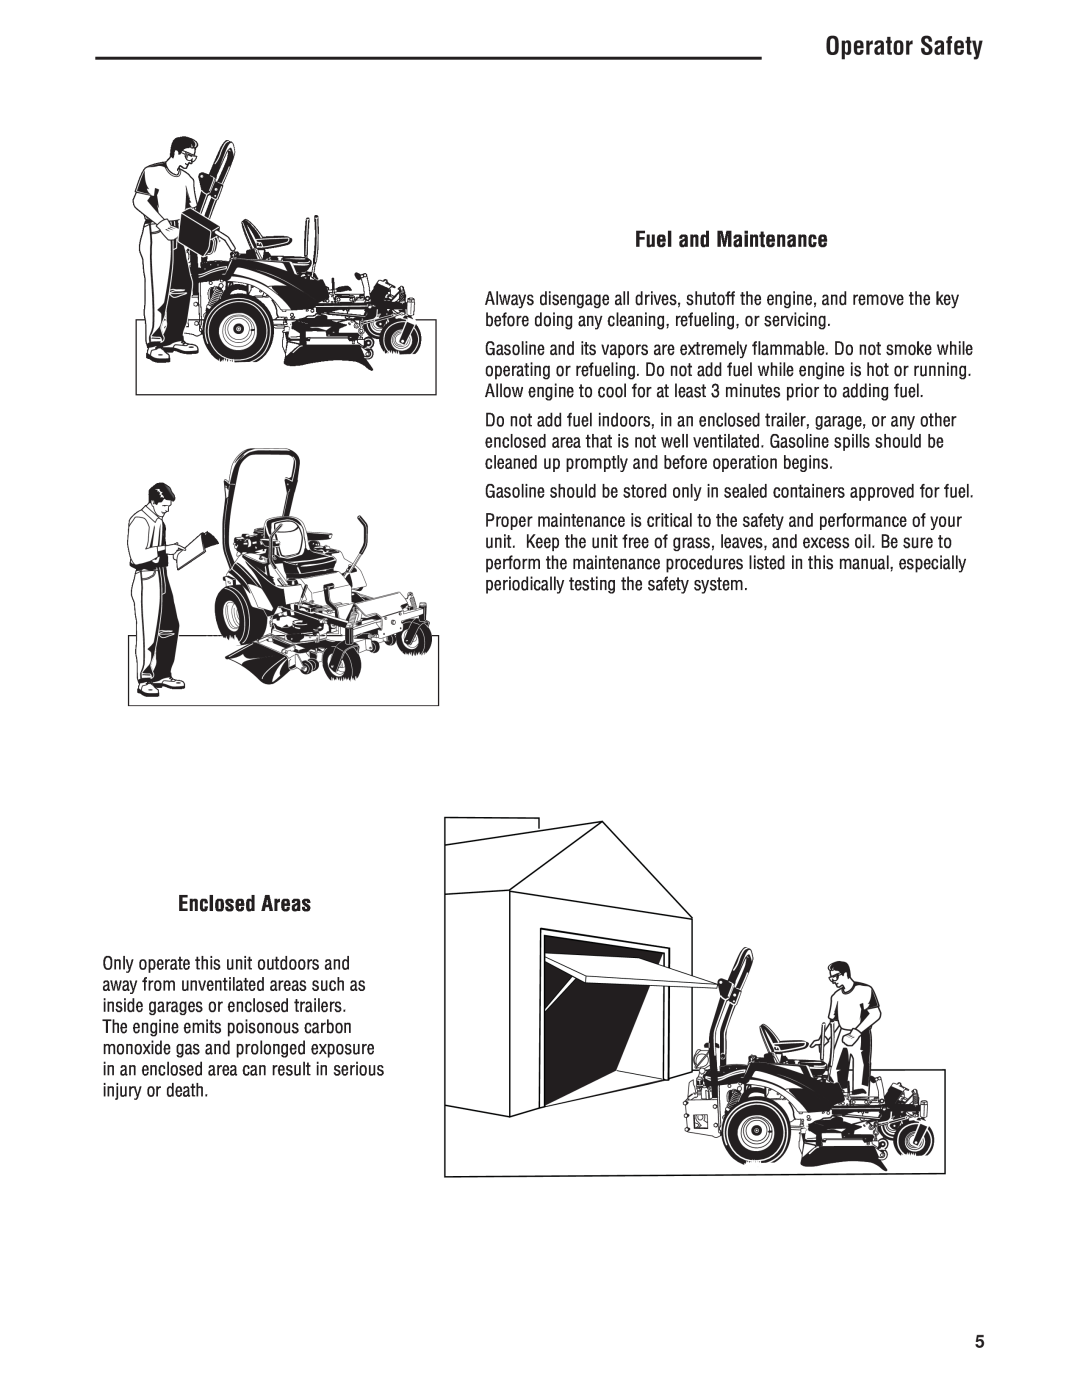 Simplicity 5101604, 543777-0113-E1 manual Fuel and Maintenance, Enclosed Areas, Operator Safety 